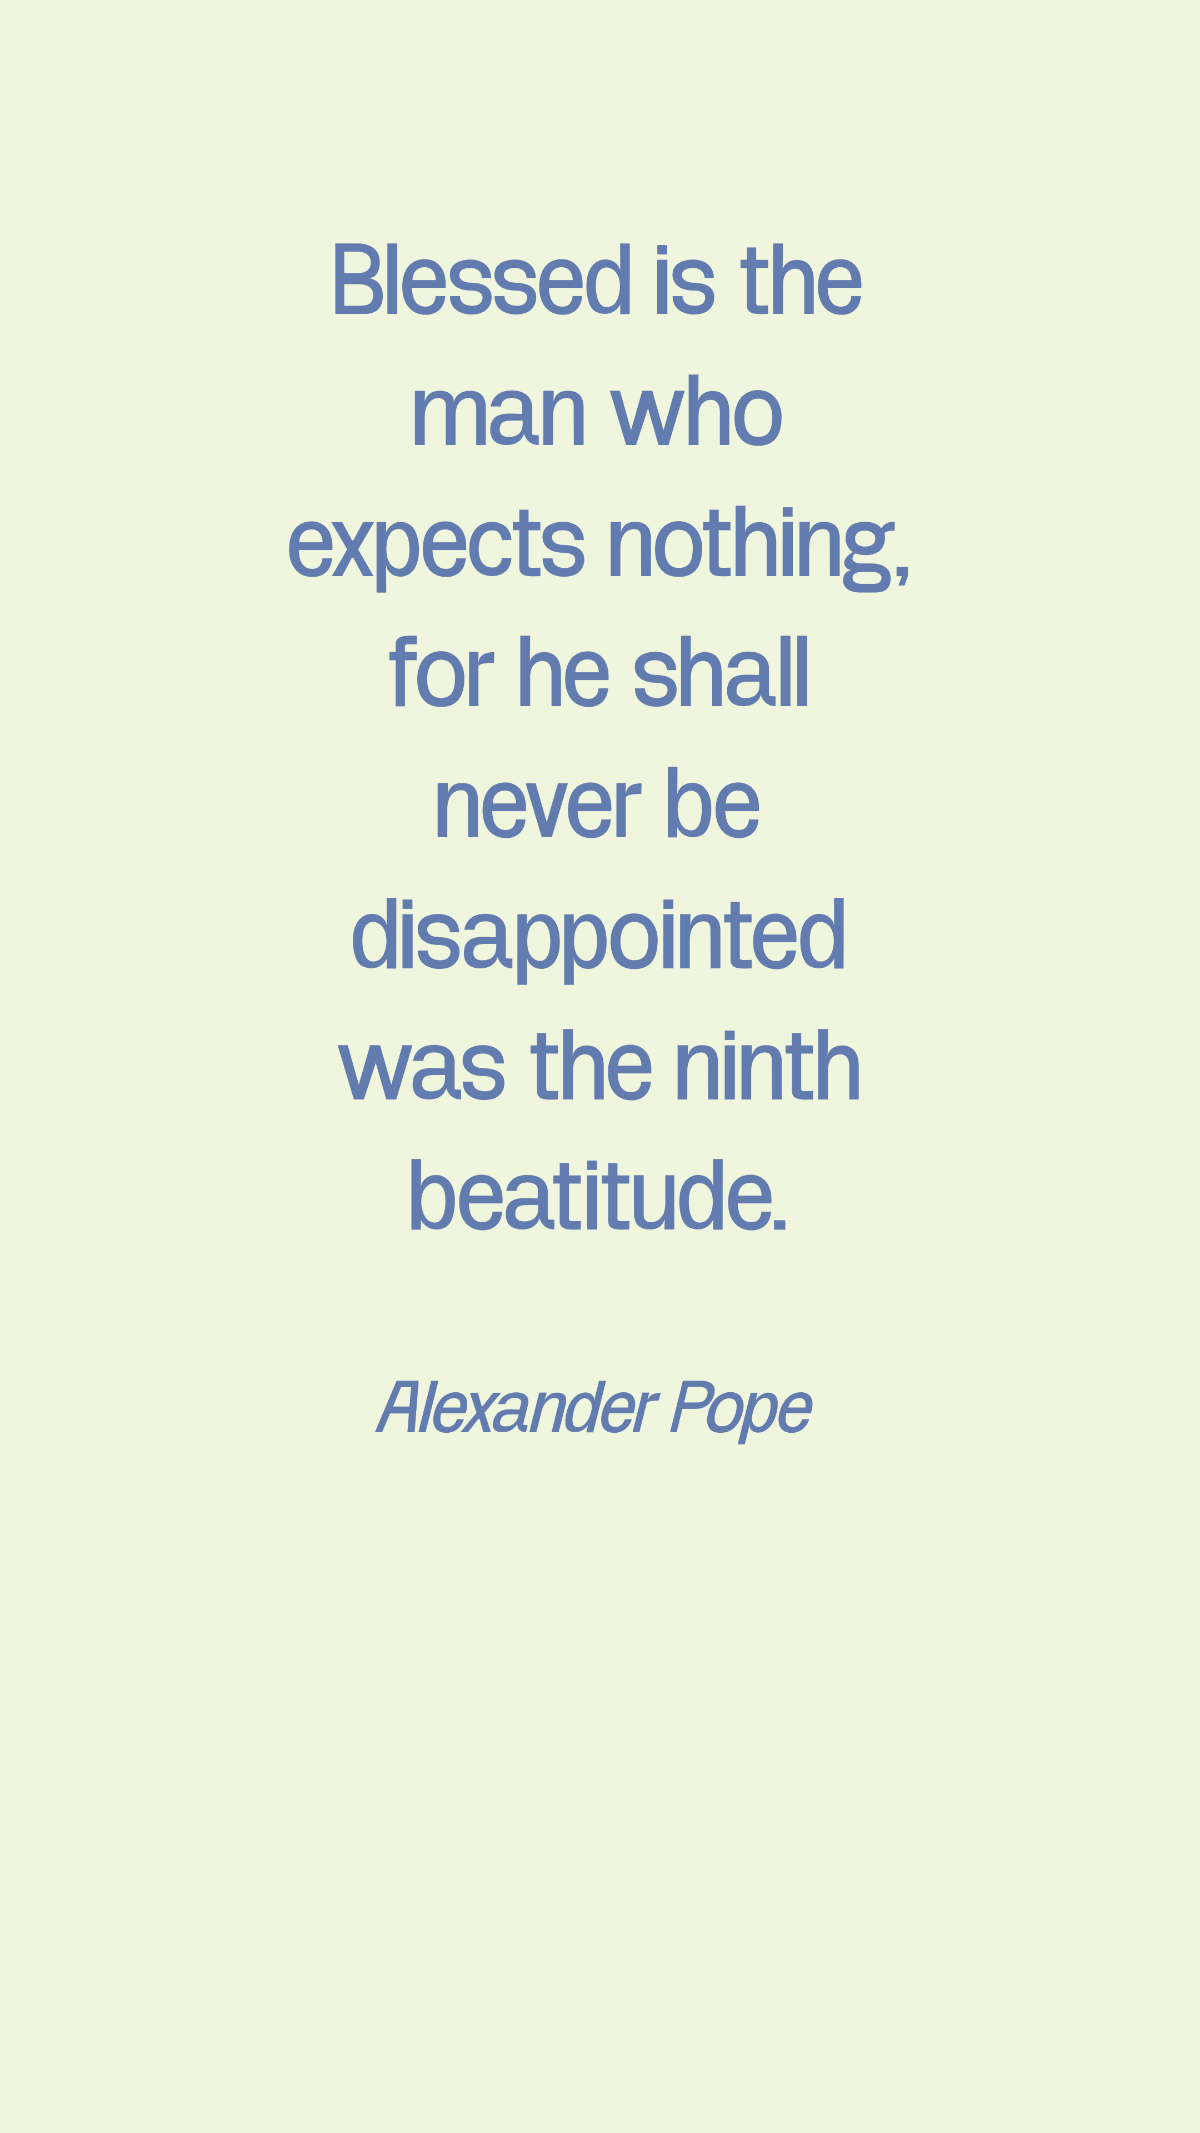 Alexander Pope - Blessed is the man who expects nothing, for he shall never be disappointed was the ninth beatitude.